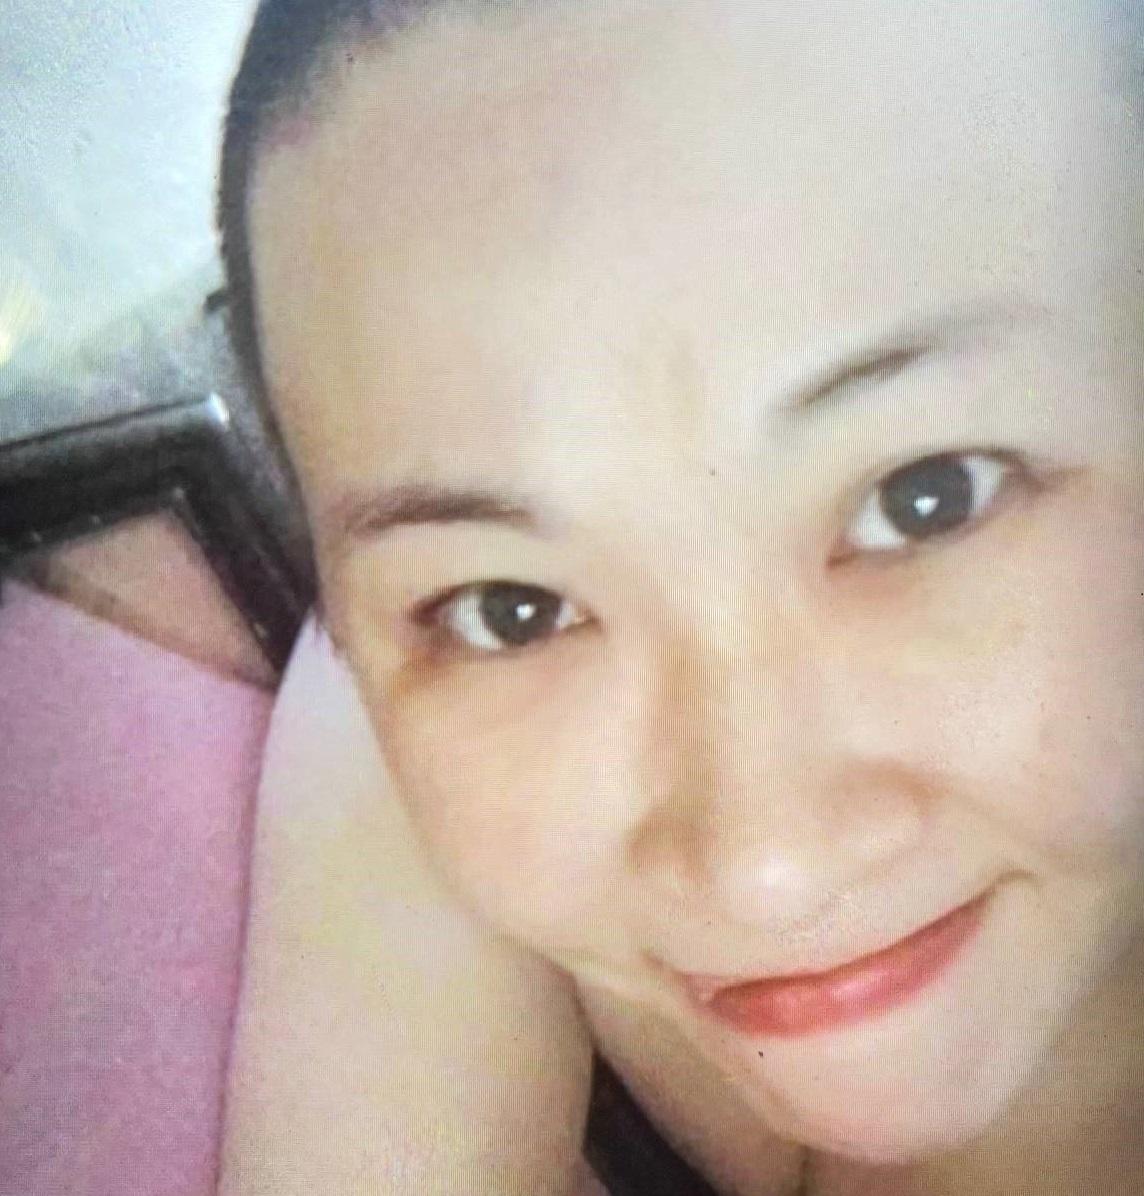 Tsang Maan-sho, aged 37, is about 1.6 metres tall, 60 kilograms in weight and of fat build. She has a round face with yellow complexion and short brown hair.